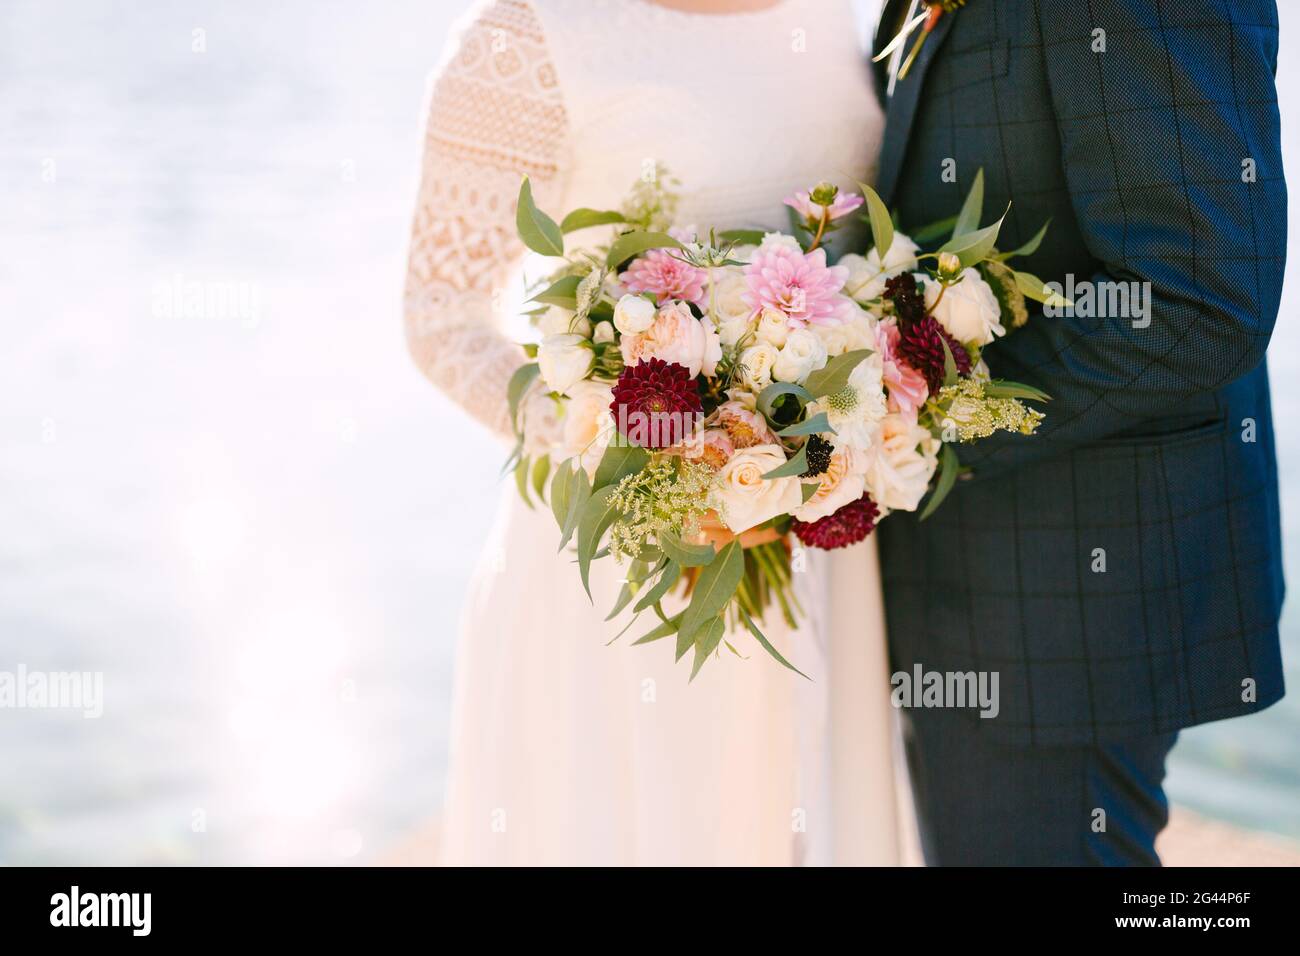 Bride and groom holding a beautiful bouquet of flowers Stock Photo